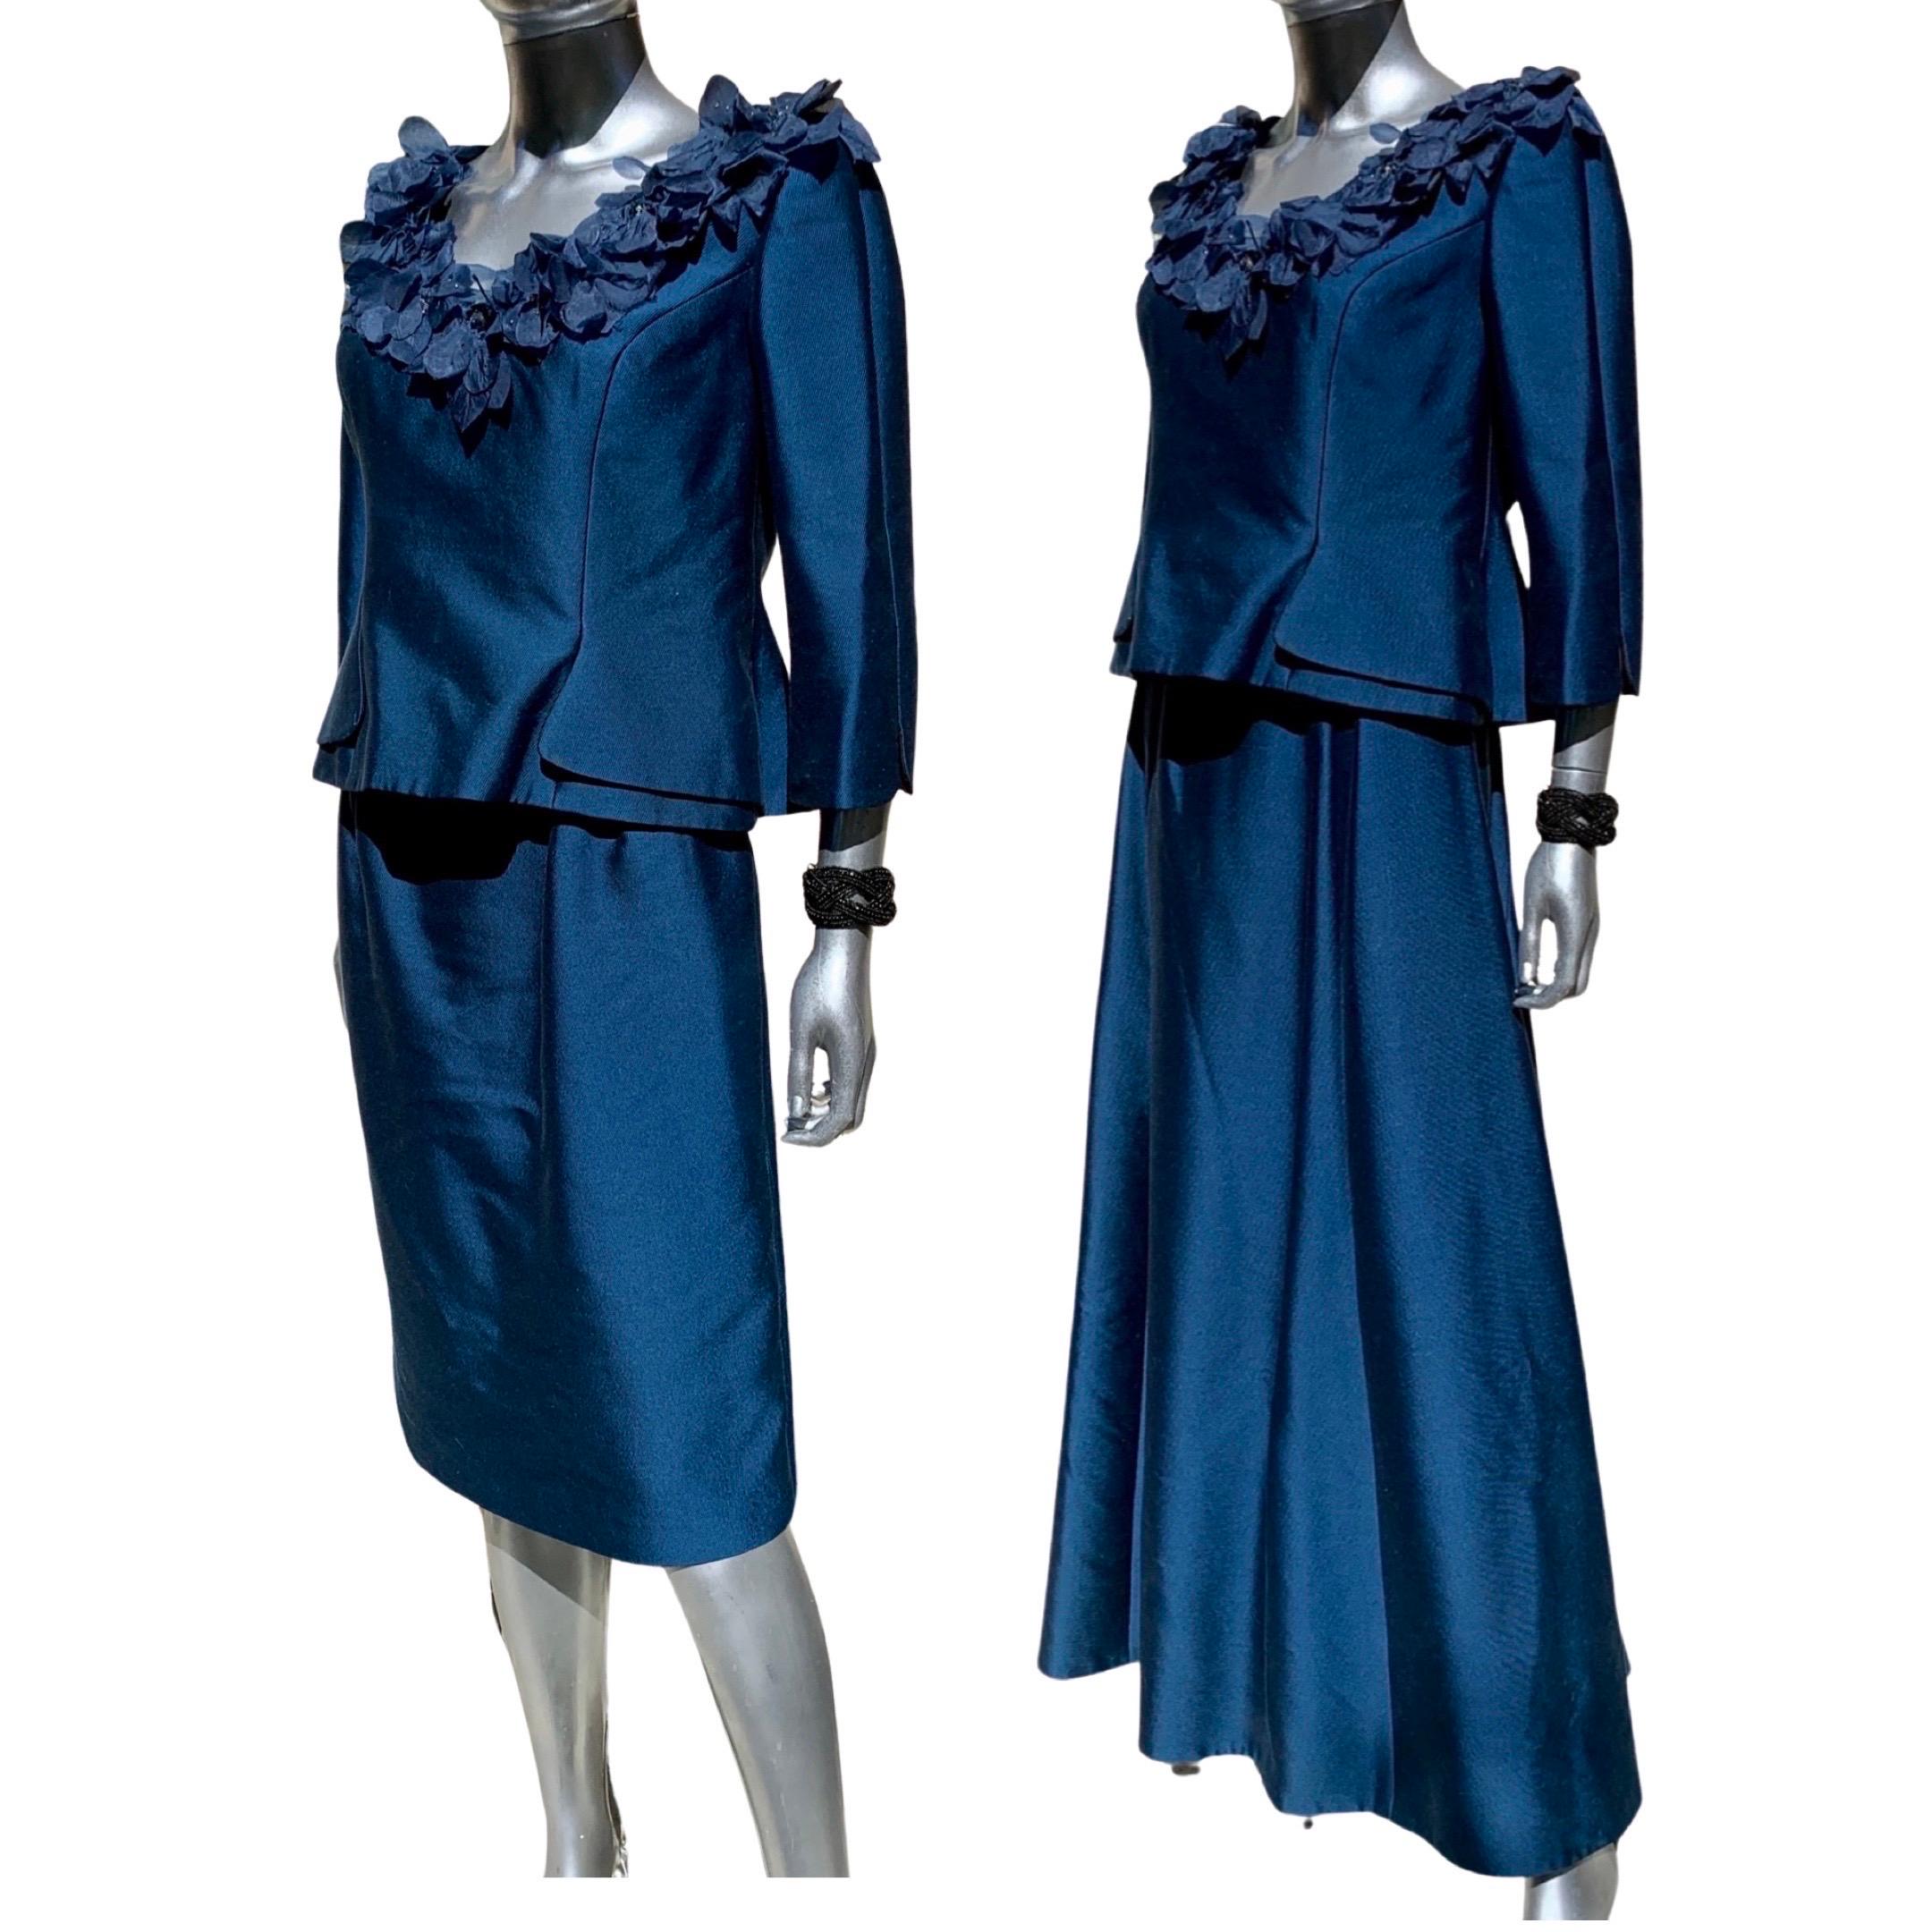 This beautiful three-piece couture evening ensemble was designed by Lilly Samii for a Socialite/Philanthropist from La Jolla Calif. It’s as beautiful as it is versatile. The fabric is a silk or silk blend twill weave in sapphire blue. The sculptural